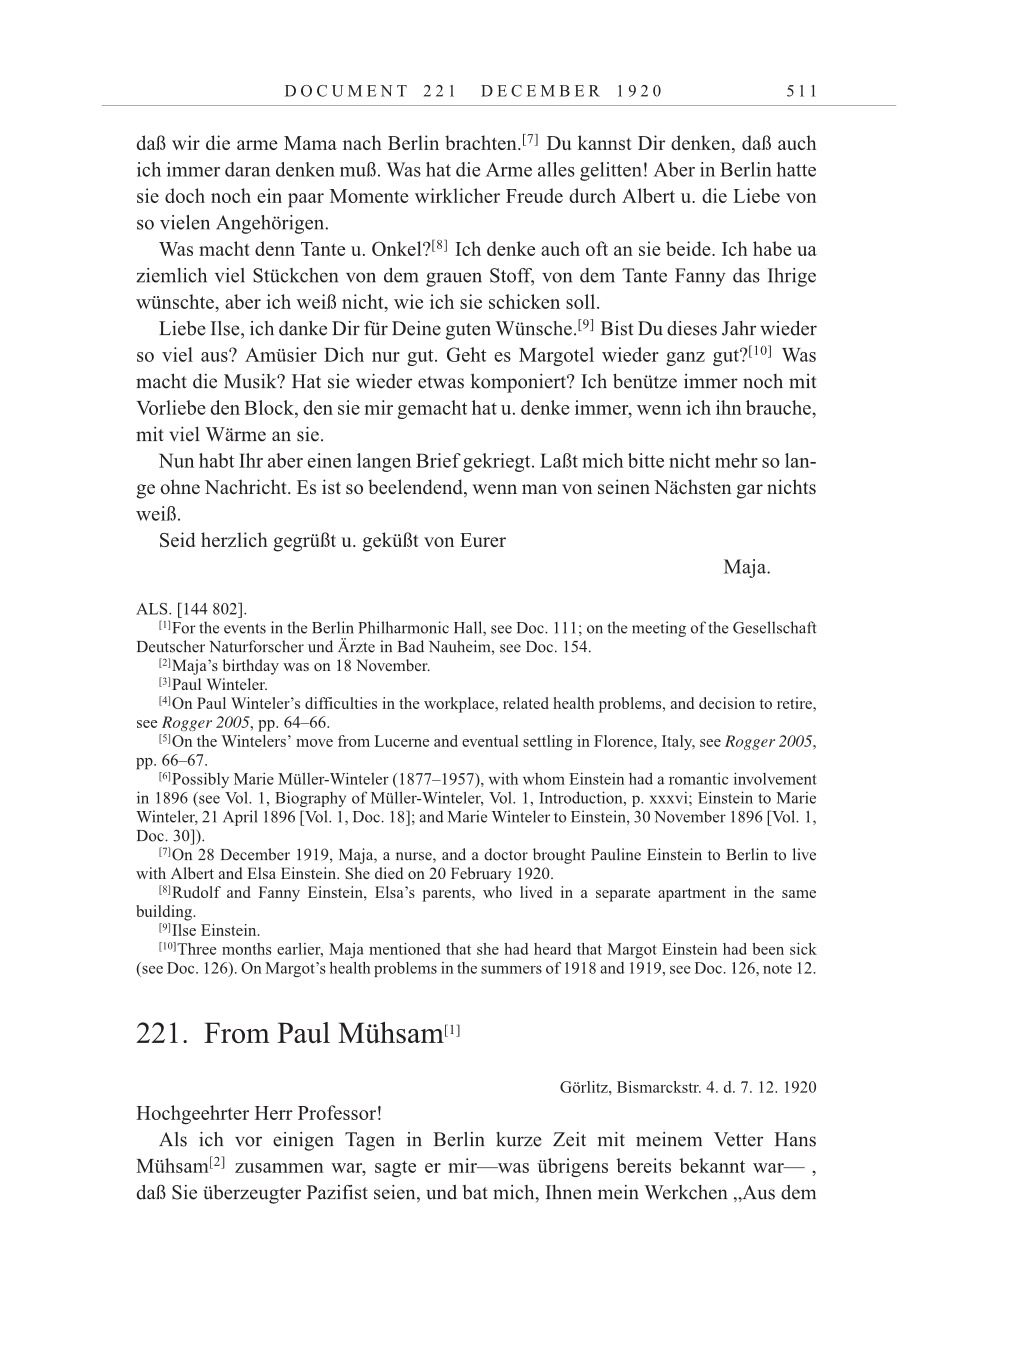 Volume 10: The Berlin Years: Correspondence May-December 1920 / Supplementary Correspondence 1909-1920 page 511